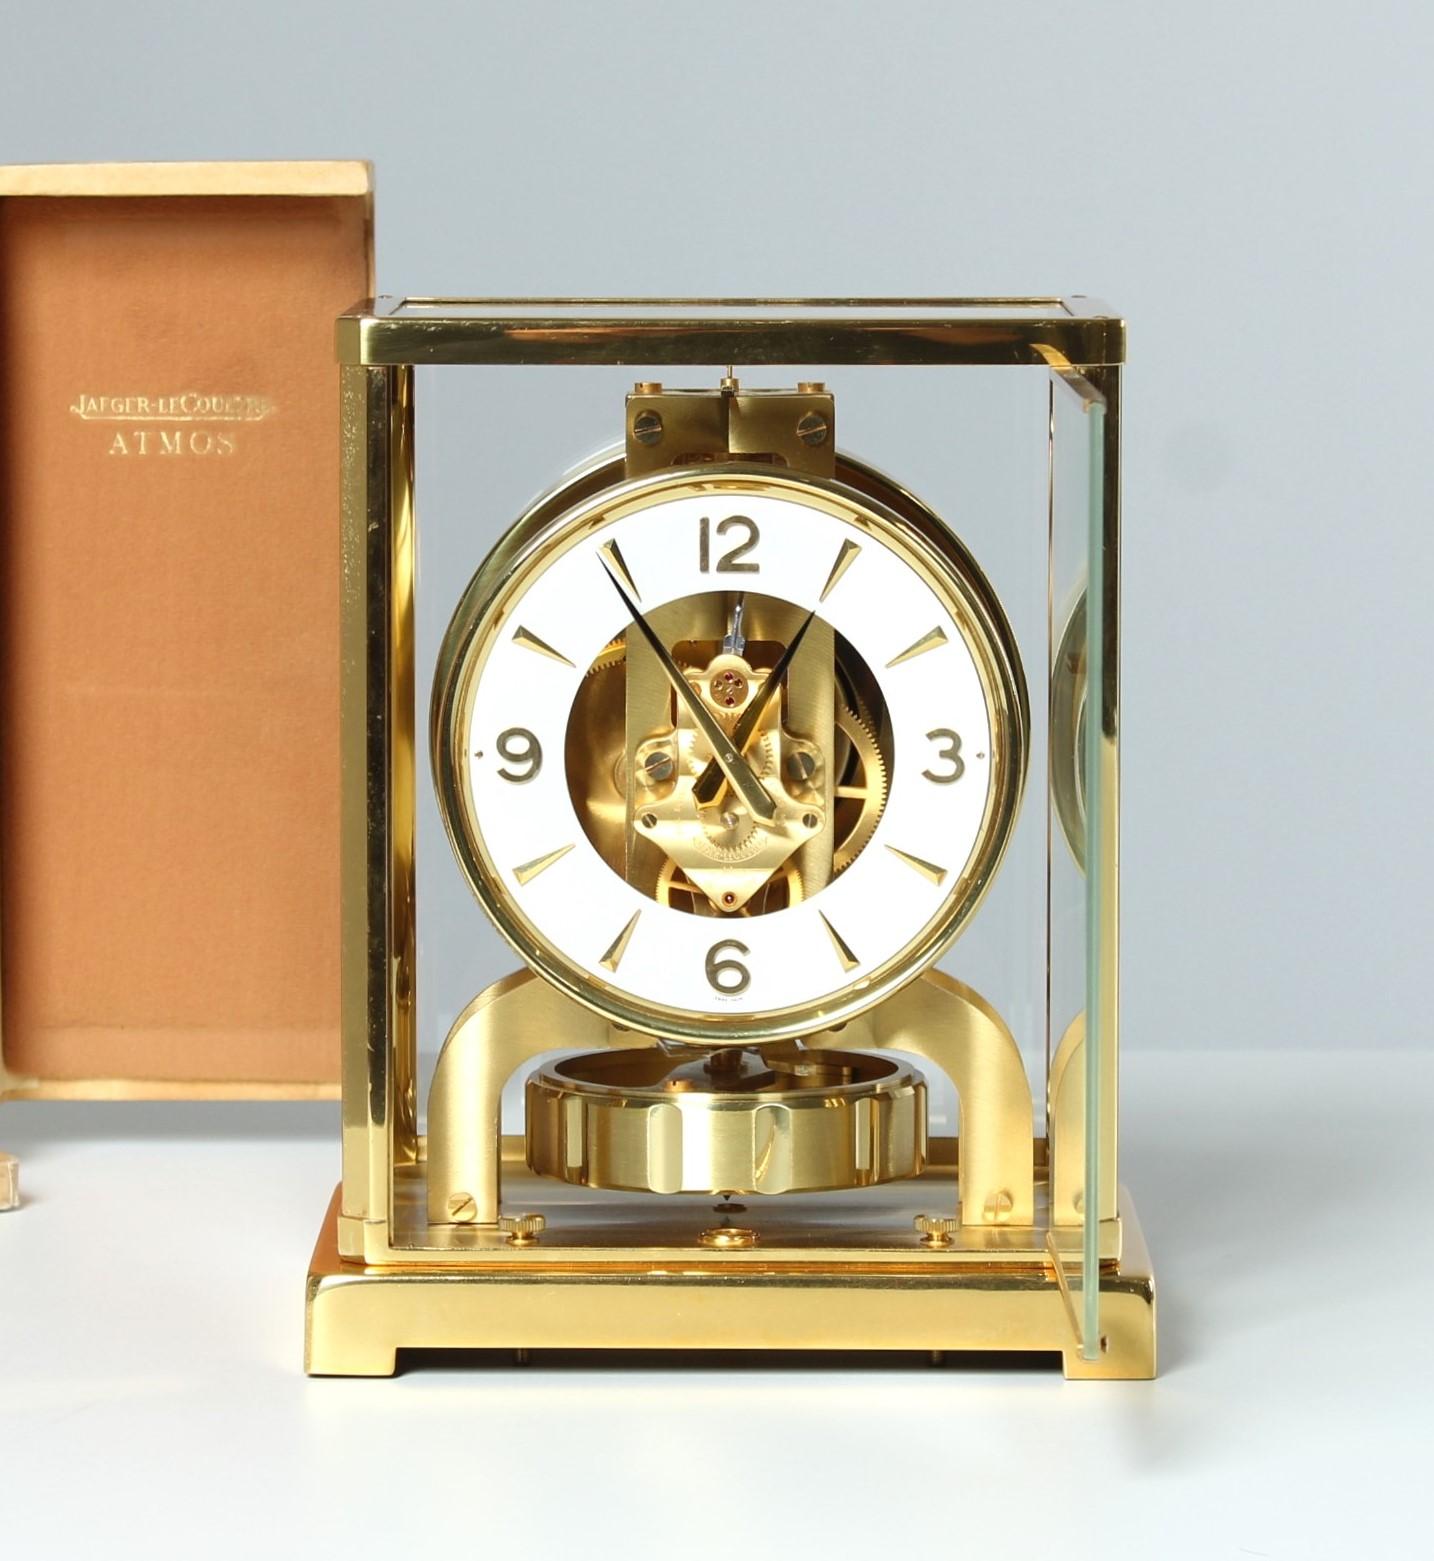 Mid-Century Modern Jaeger LeCoultre, Atmos Clock with Original Box, Swiss Made in 1965